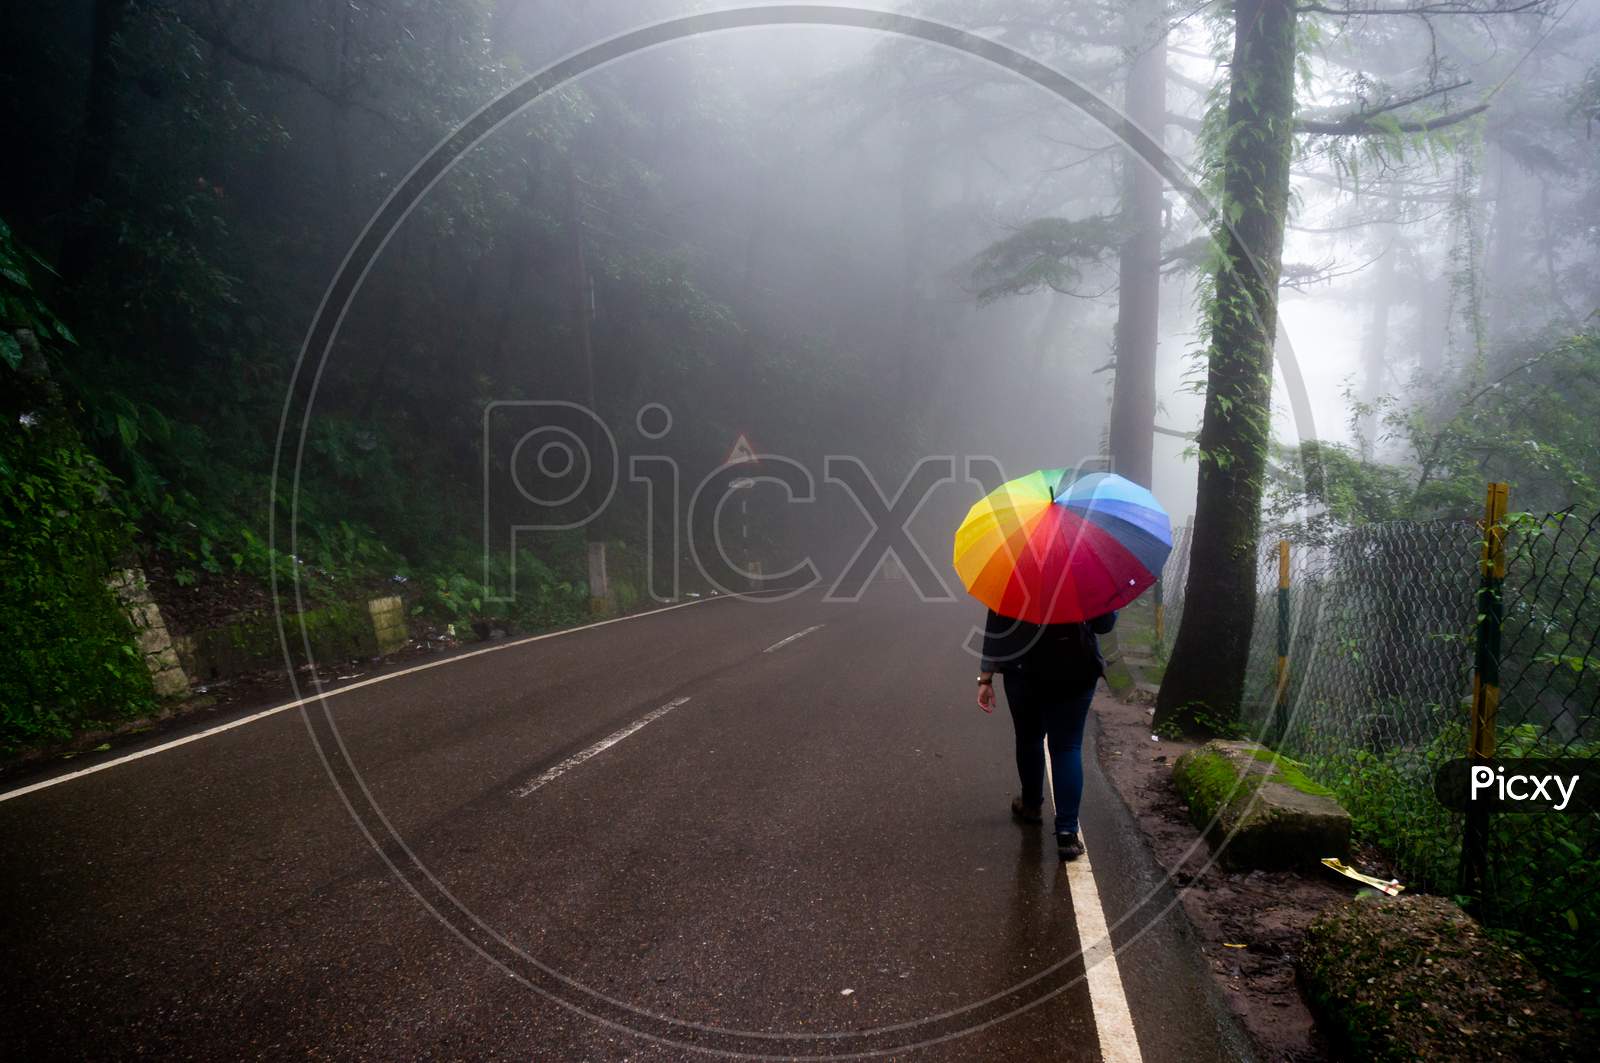 Young Indian Girl Walking With A Colorful Umbrella On A Foggy Hill Side Street